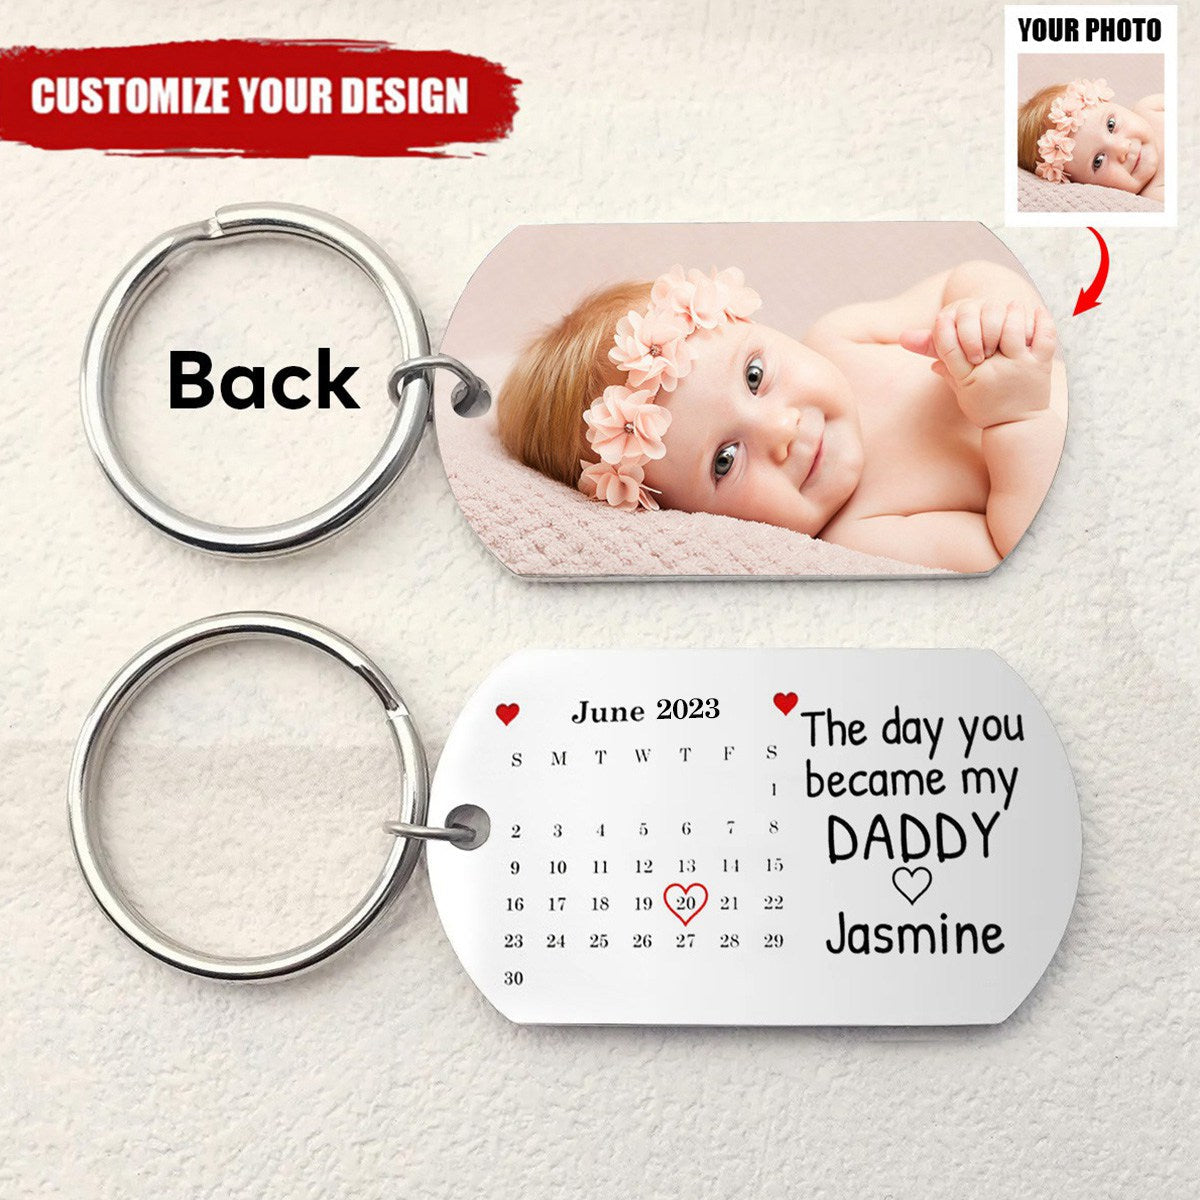 Calendar Custom Photo The Day You Became My Mommy - Personalized Keychain